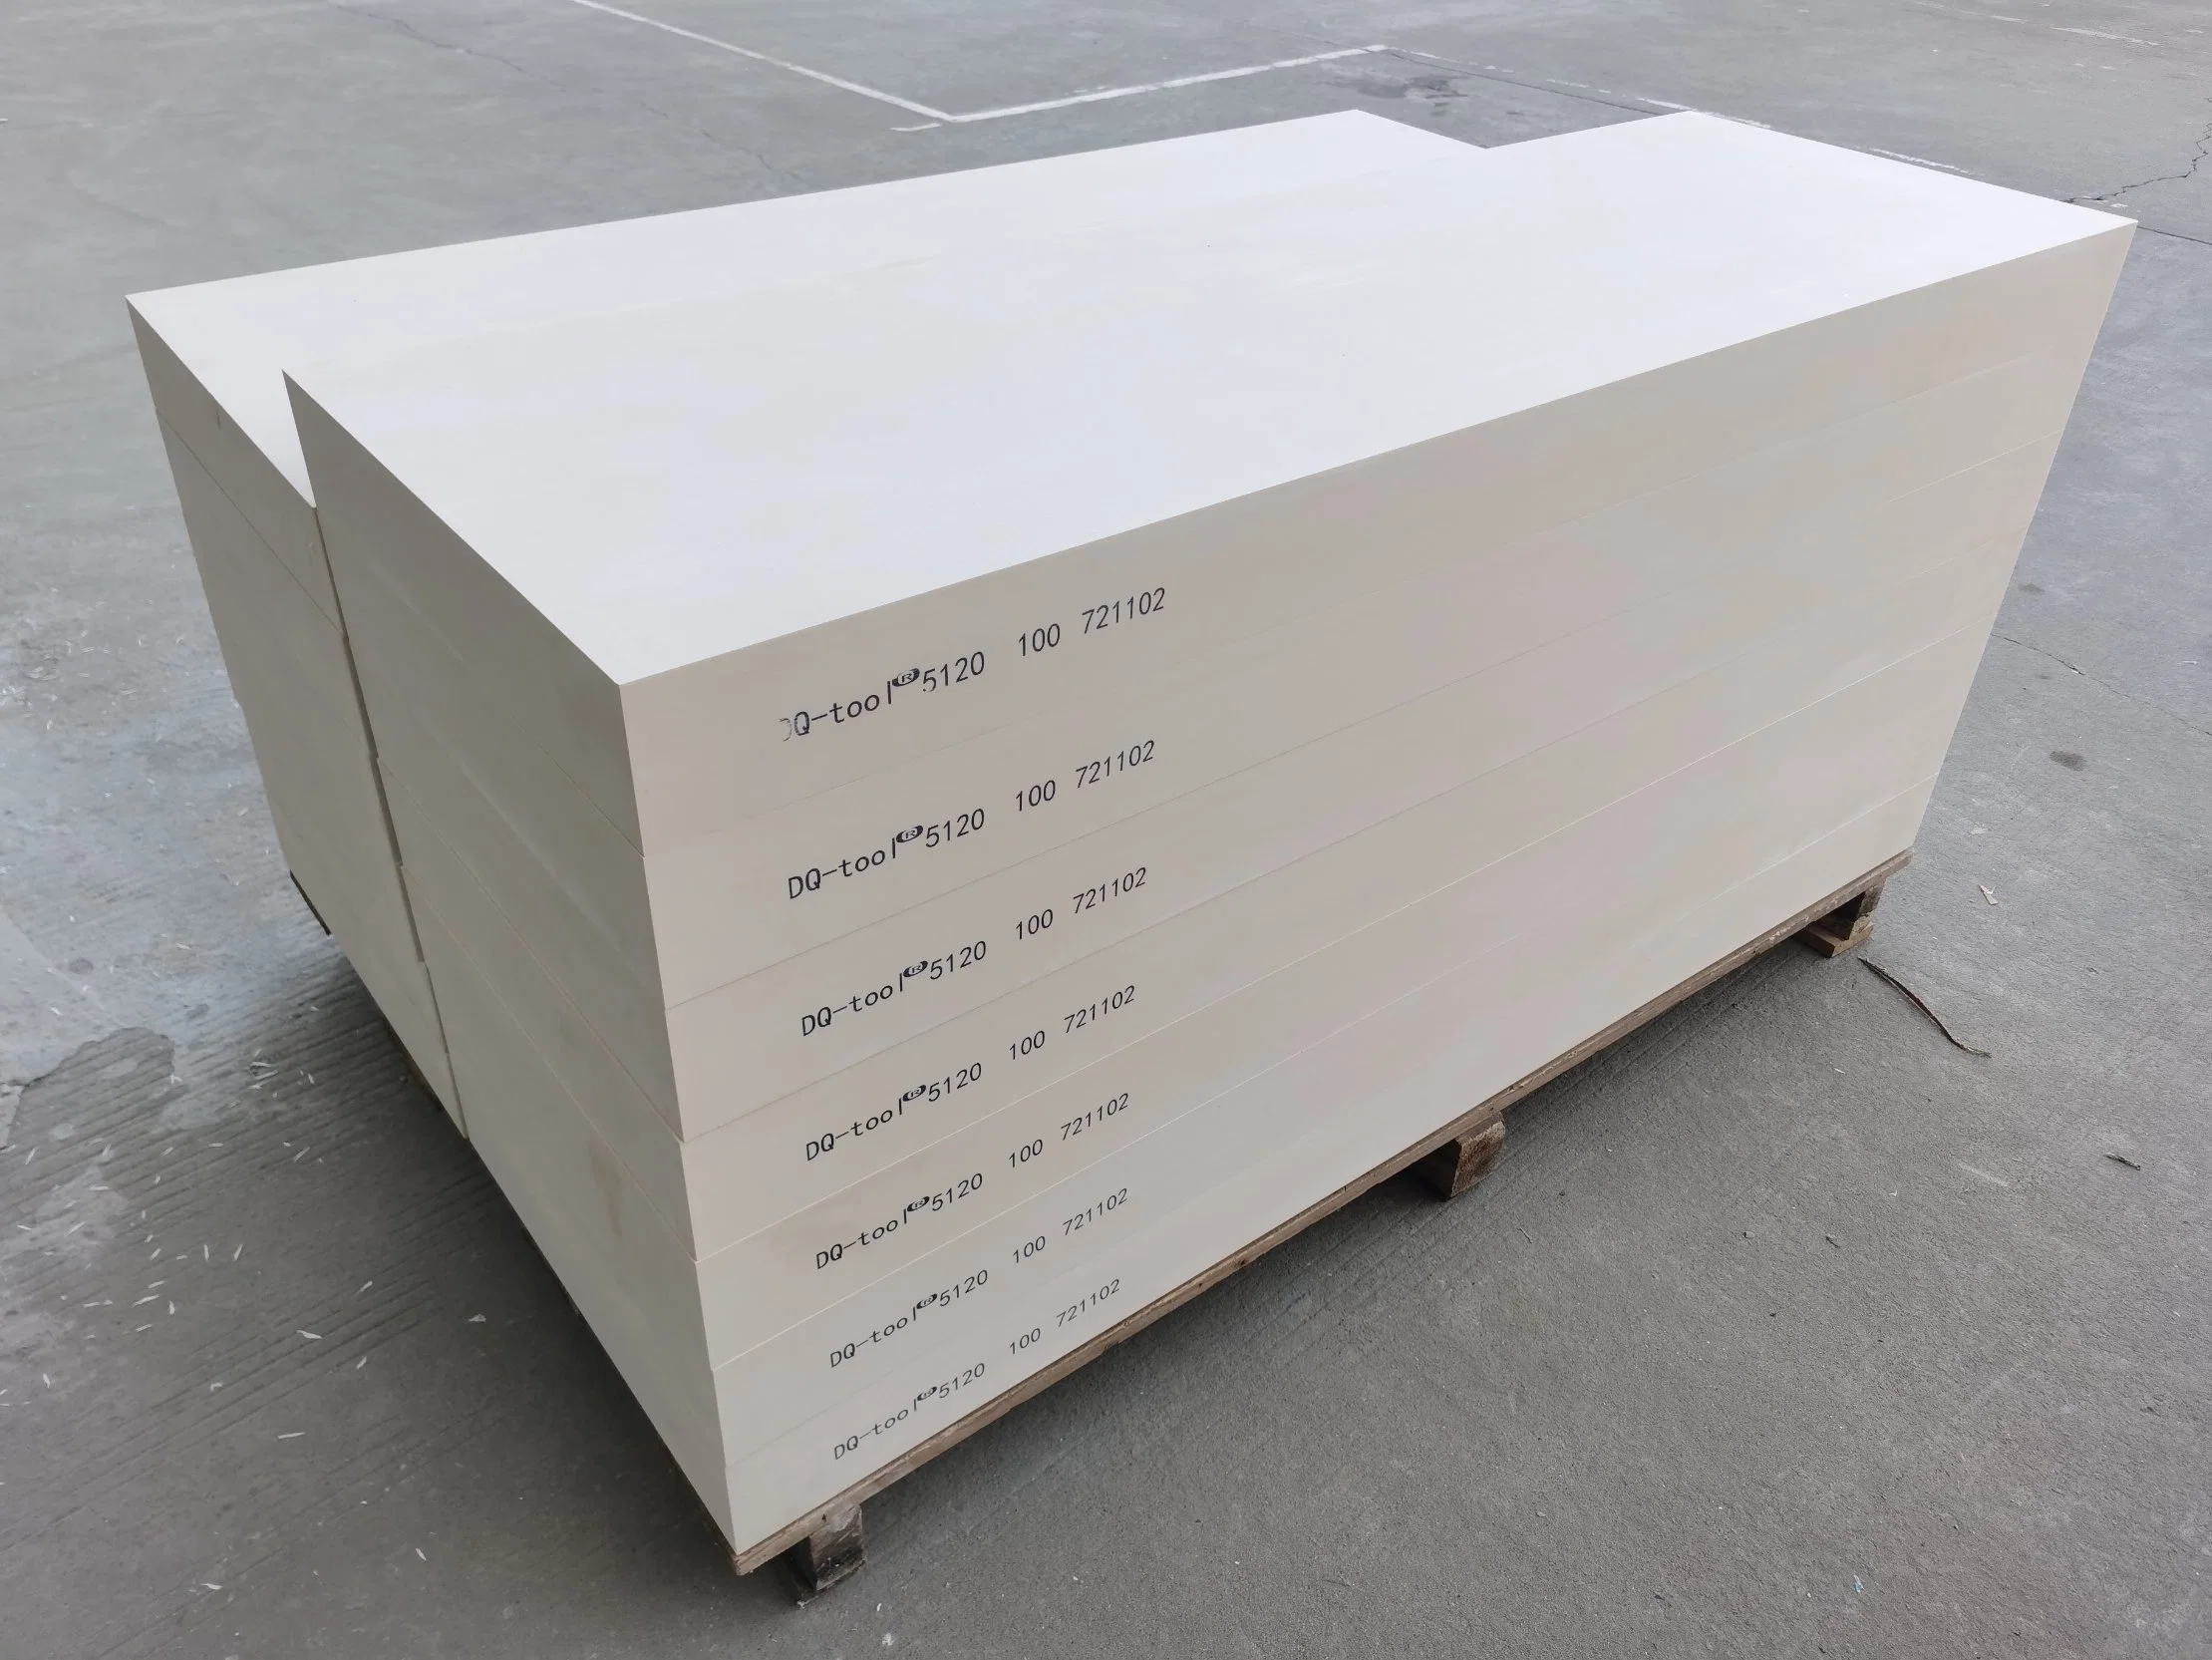 Dq Polystyrene Extruded Foam Extruded Polystyrene Paper and Paperboard PU Board